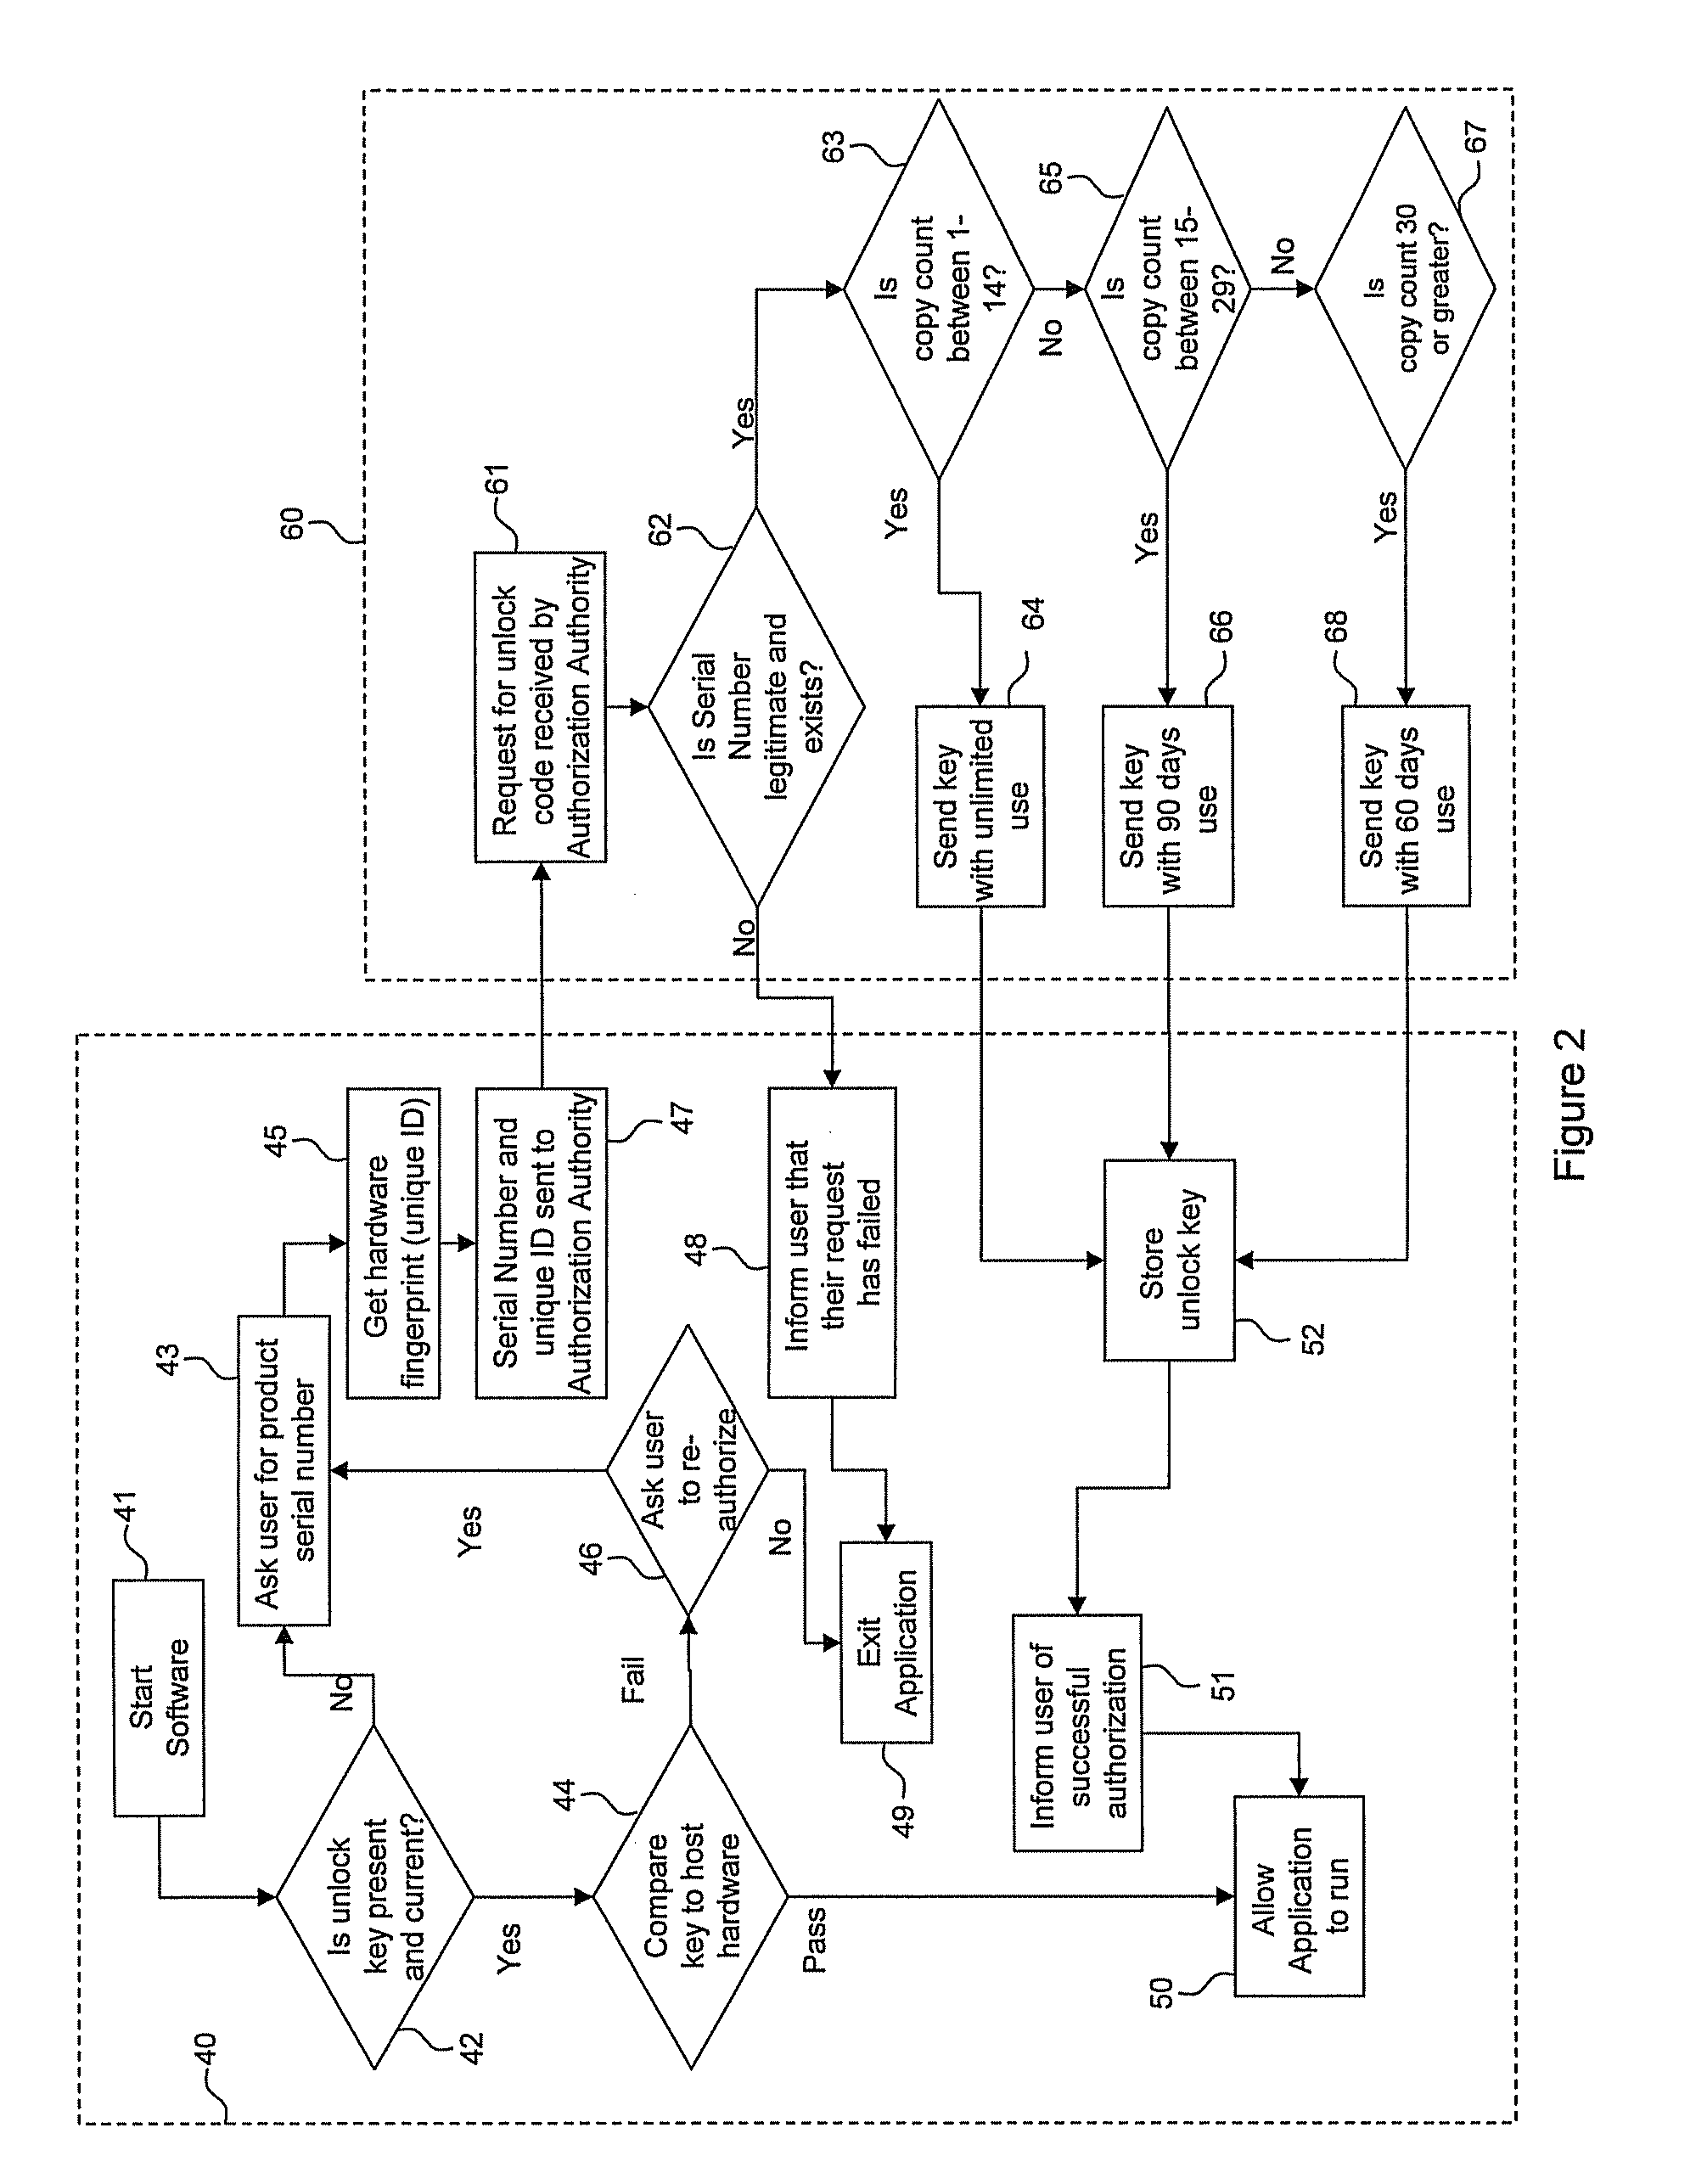 System and method for auditing software usage